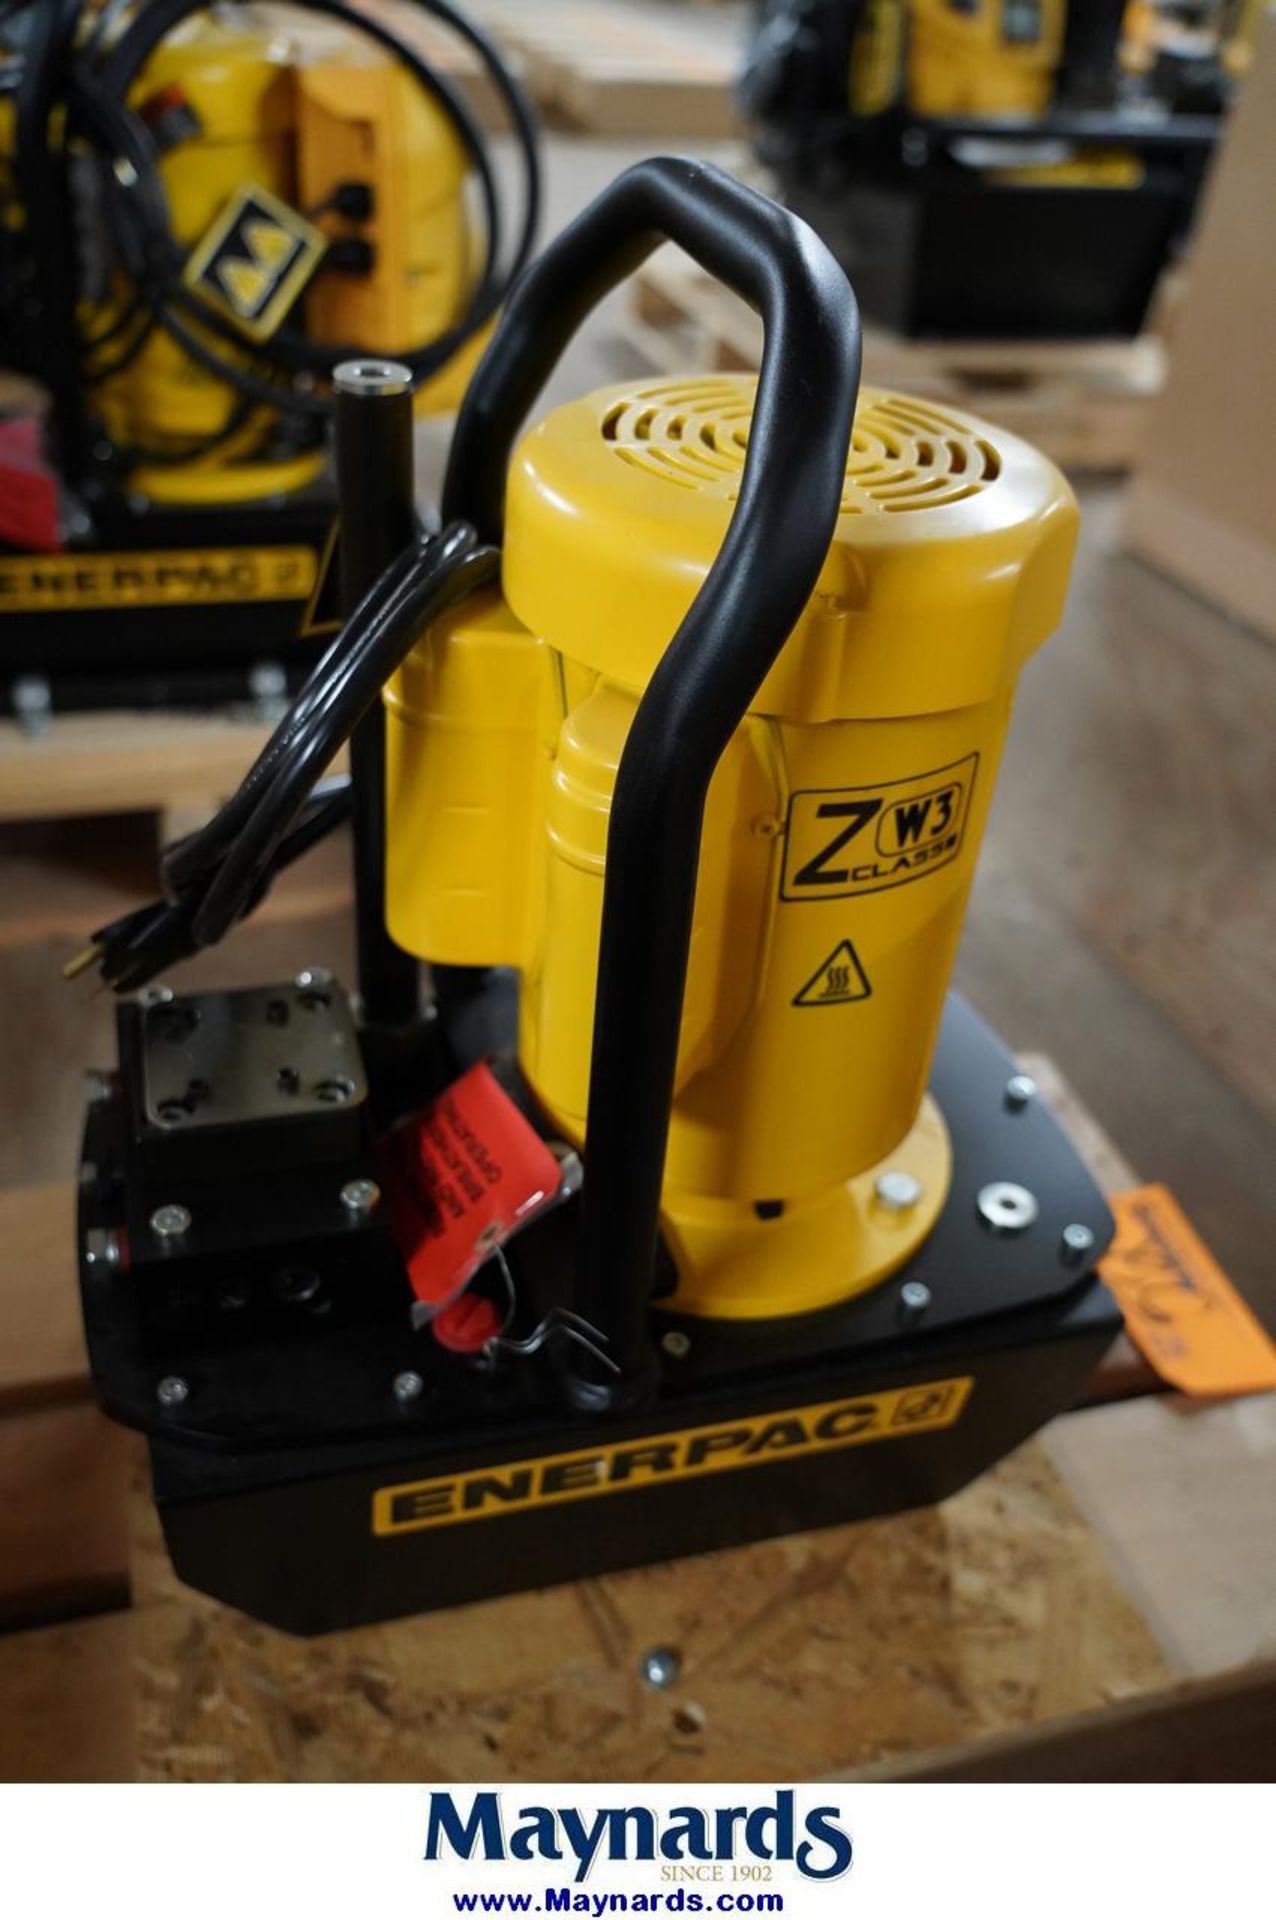 Enerpac ZW3008GI-11 ZE3 Class Electric Hydraulic Work holding Pump - Image 3 of 6